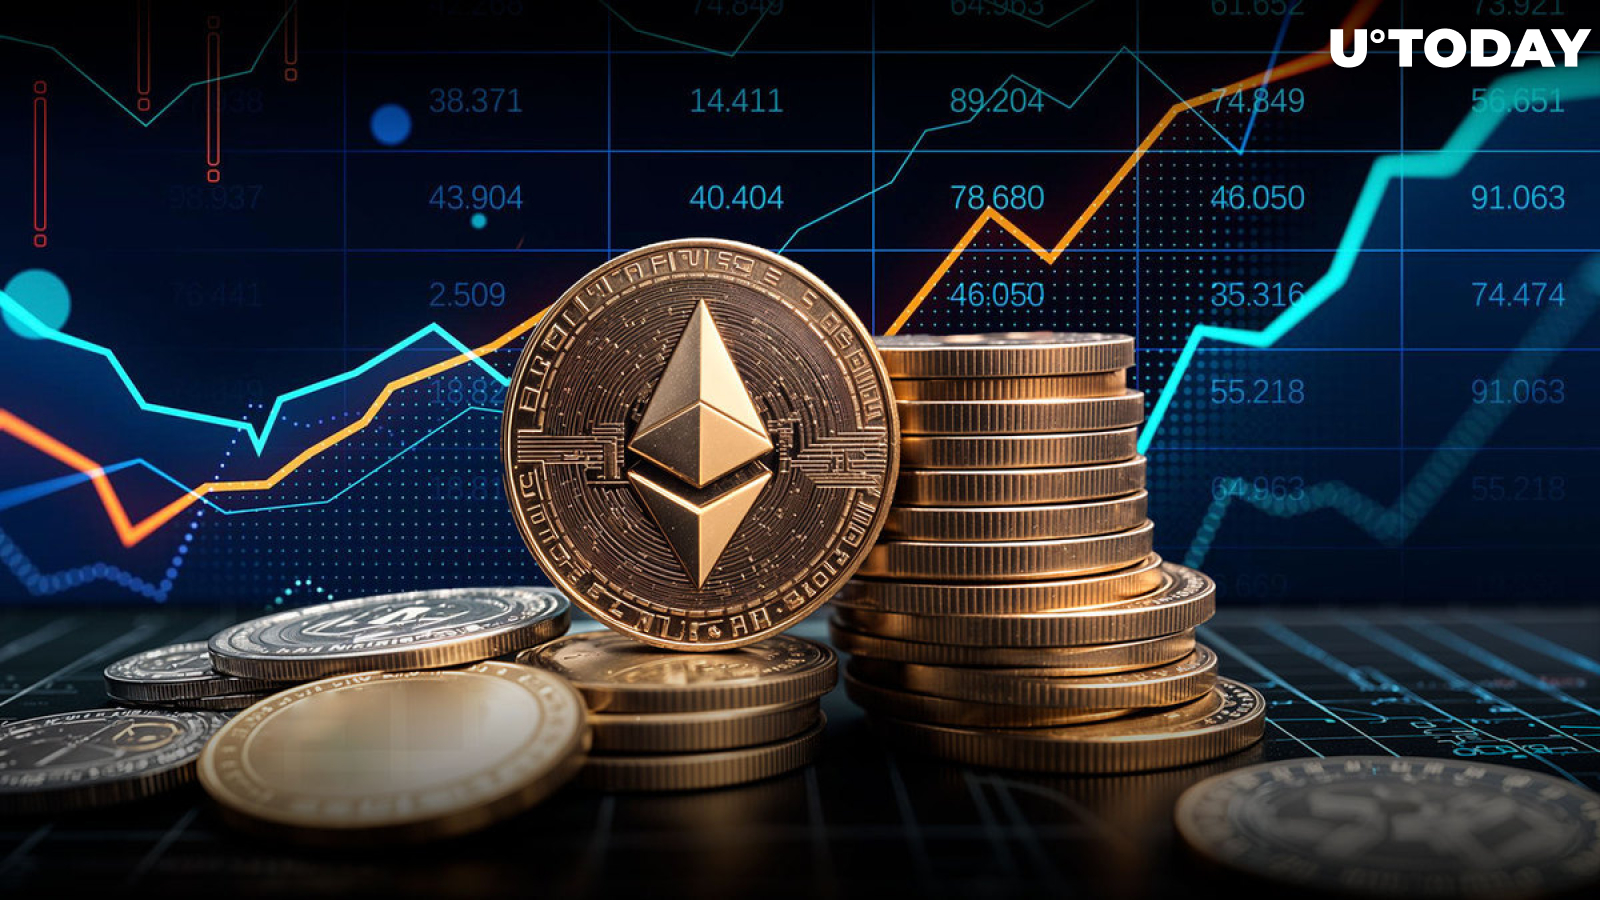 Two Major Ethereum (ETH) Price Targets Revealed